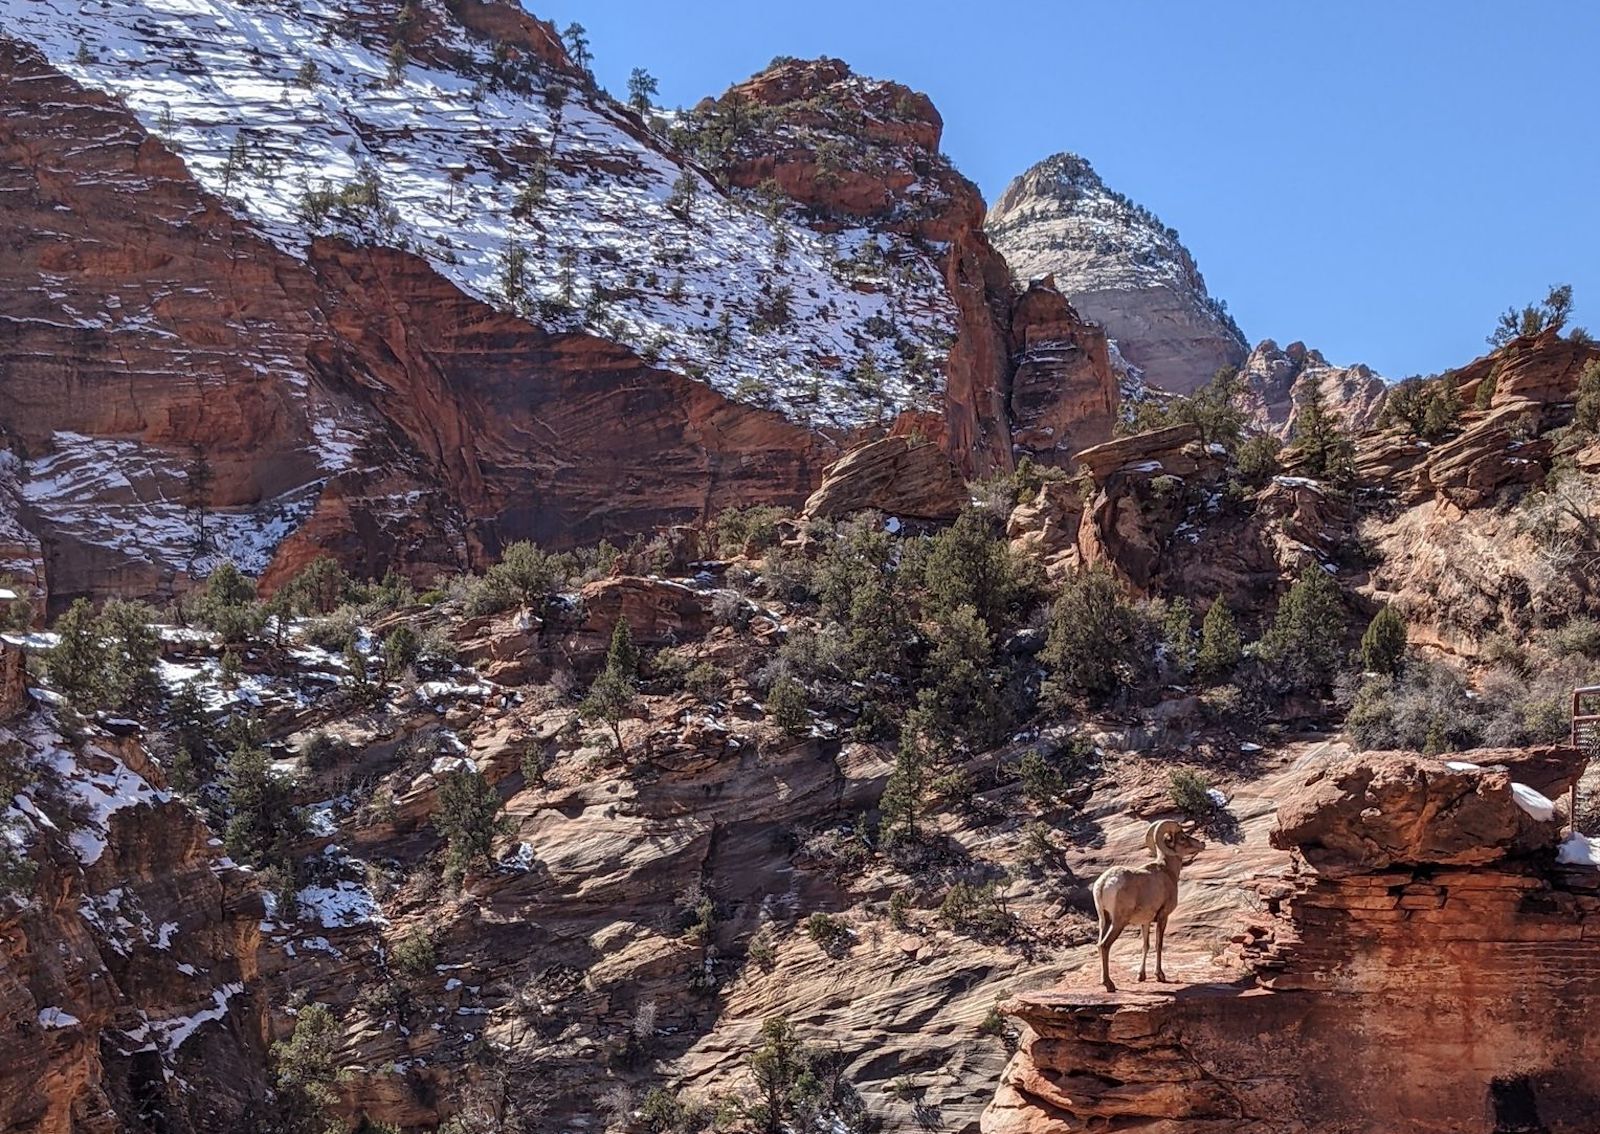 G2 Trail_Least-crowded Zion National Park hiking trails